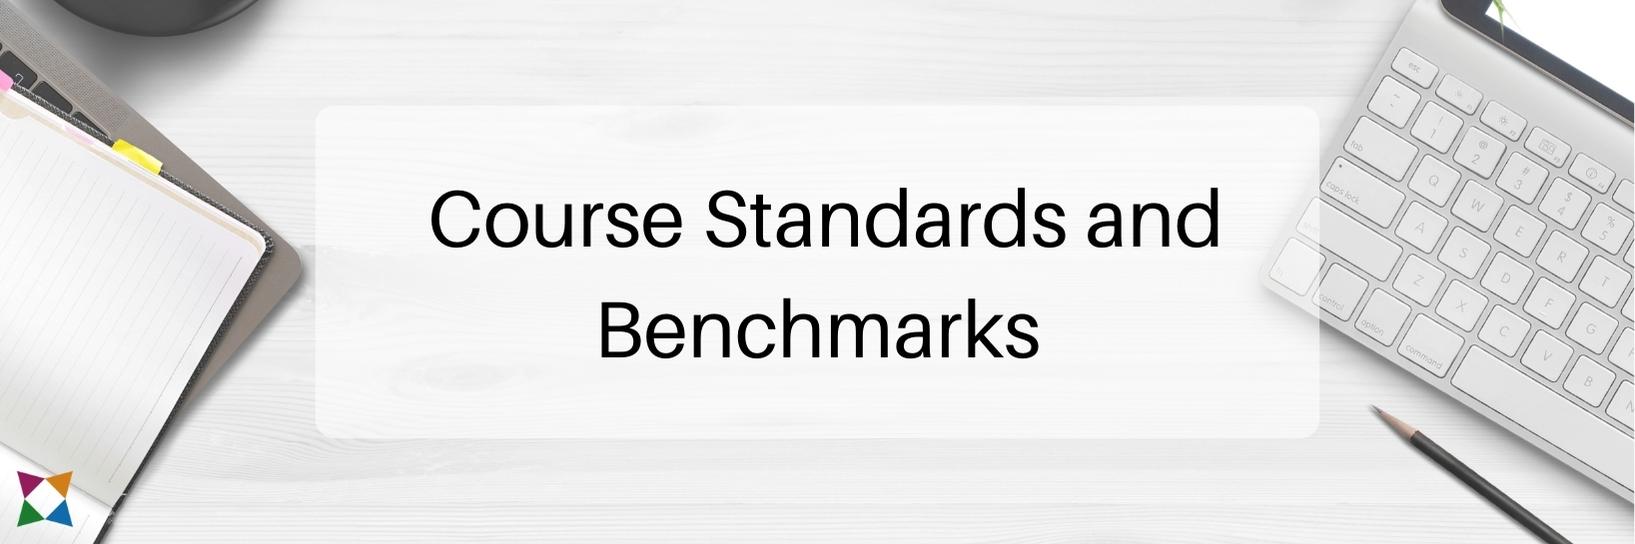 business-keyboarding-course-standards-benchmarks